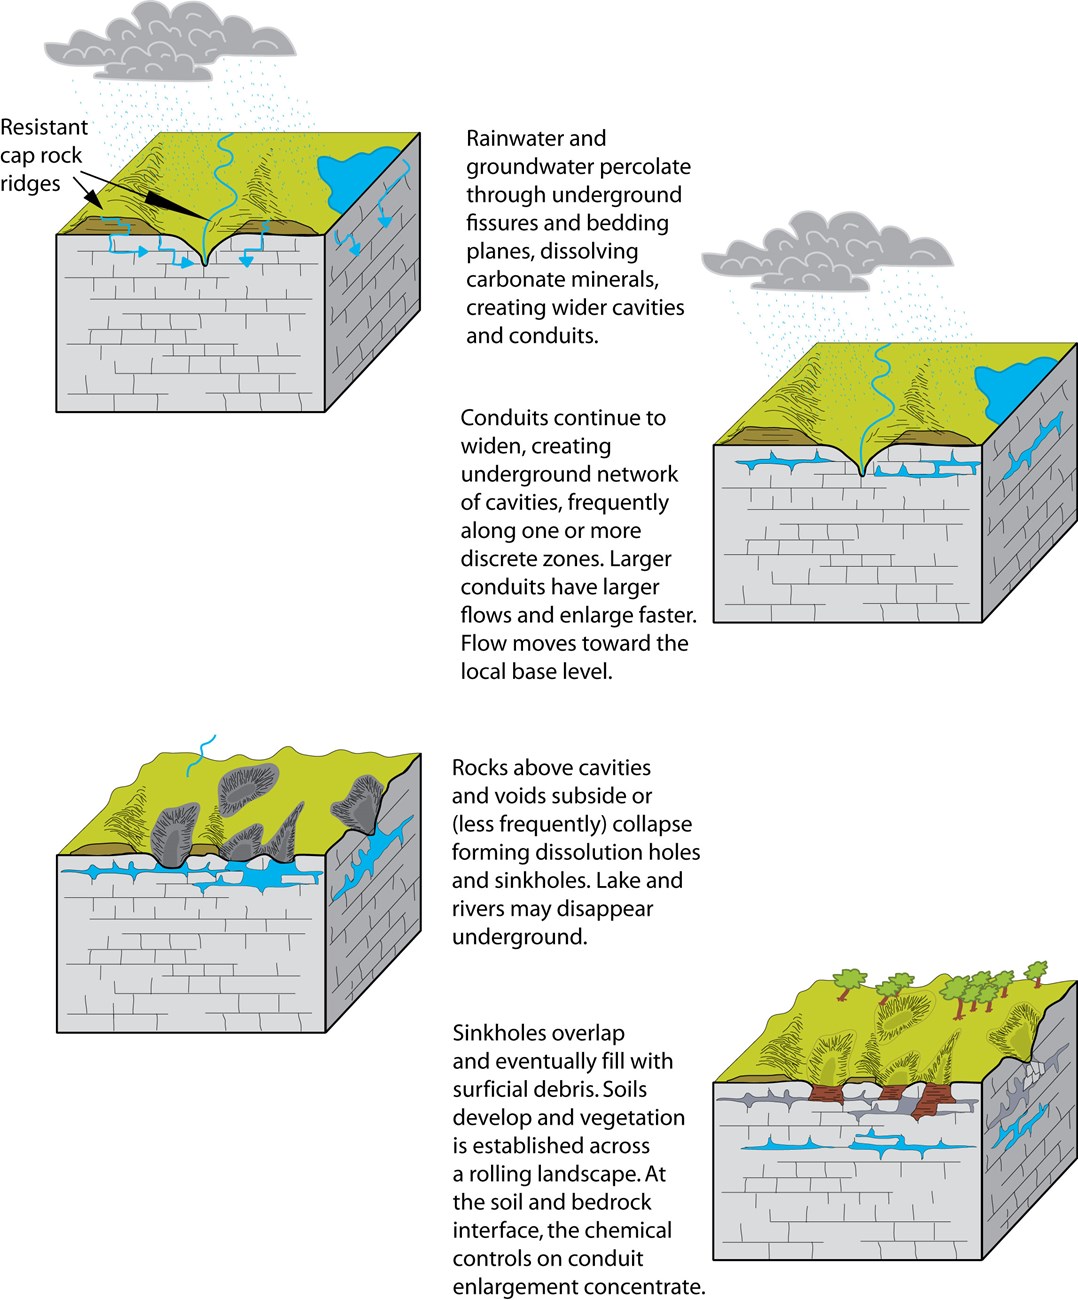 Series of generalized cross-sectional views of the development of a karstic landscape.